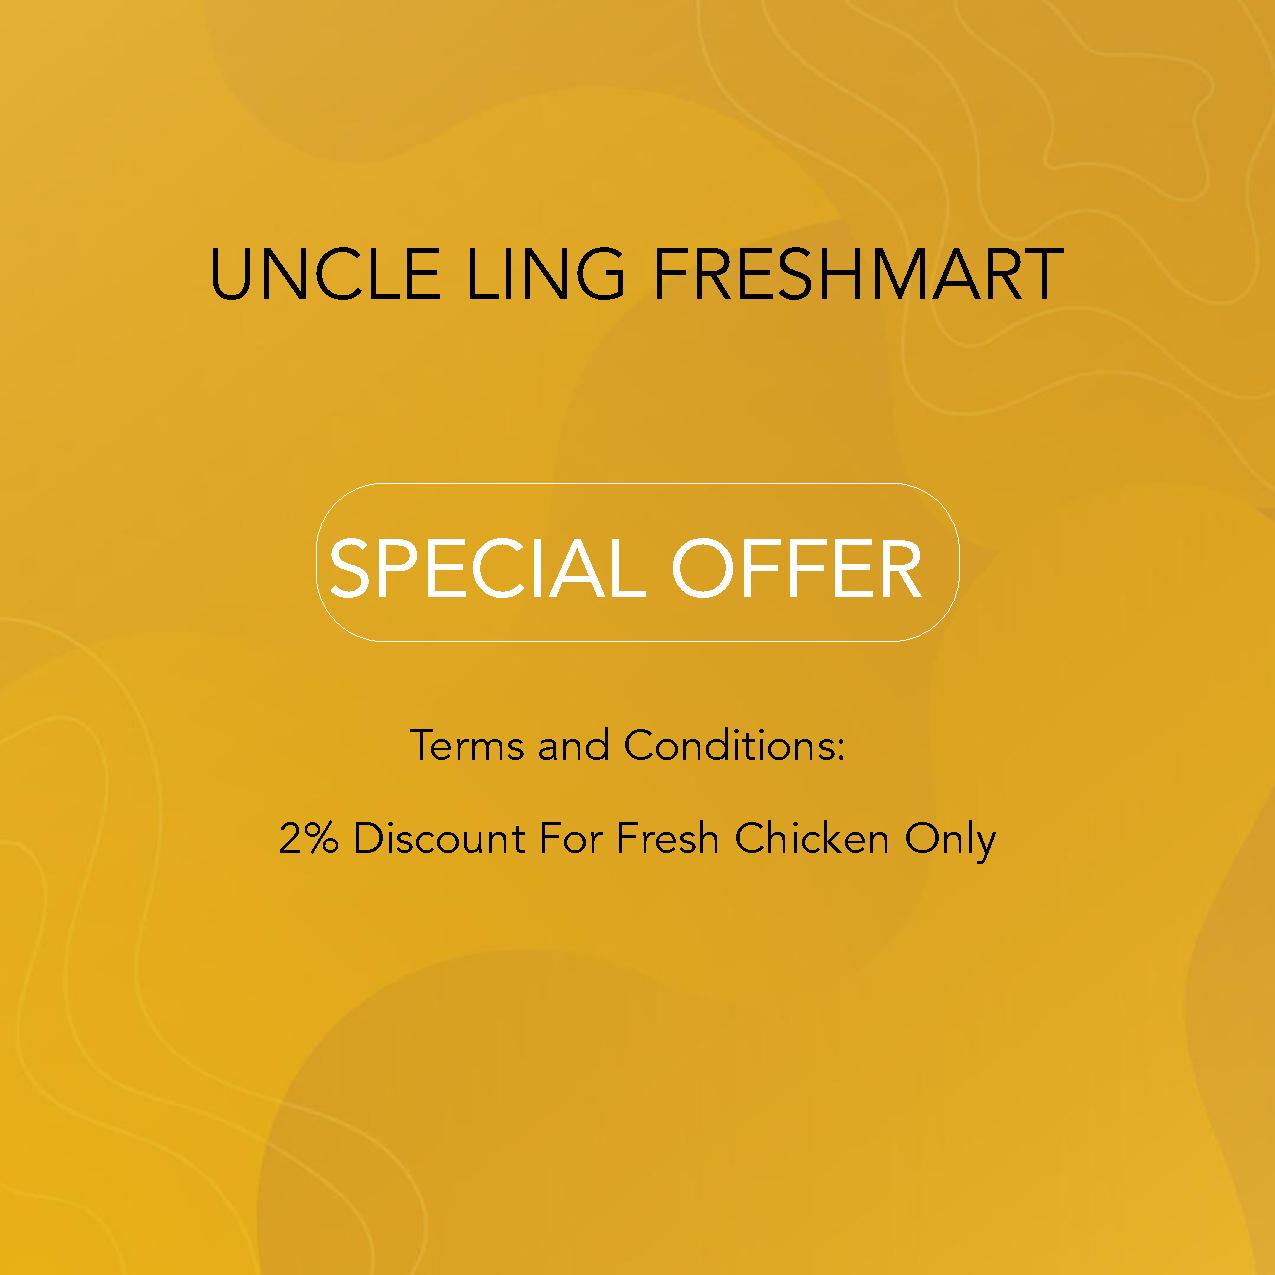 UNCLE LING FRESHMART